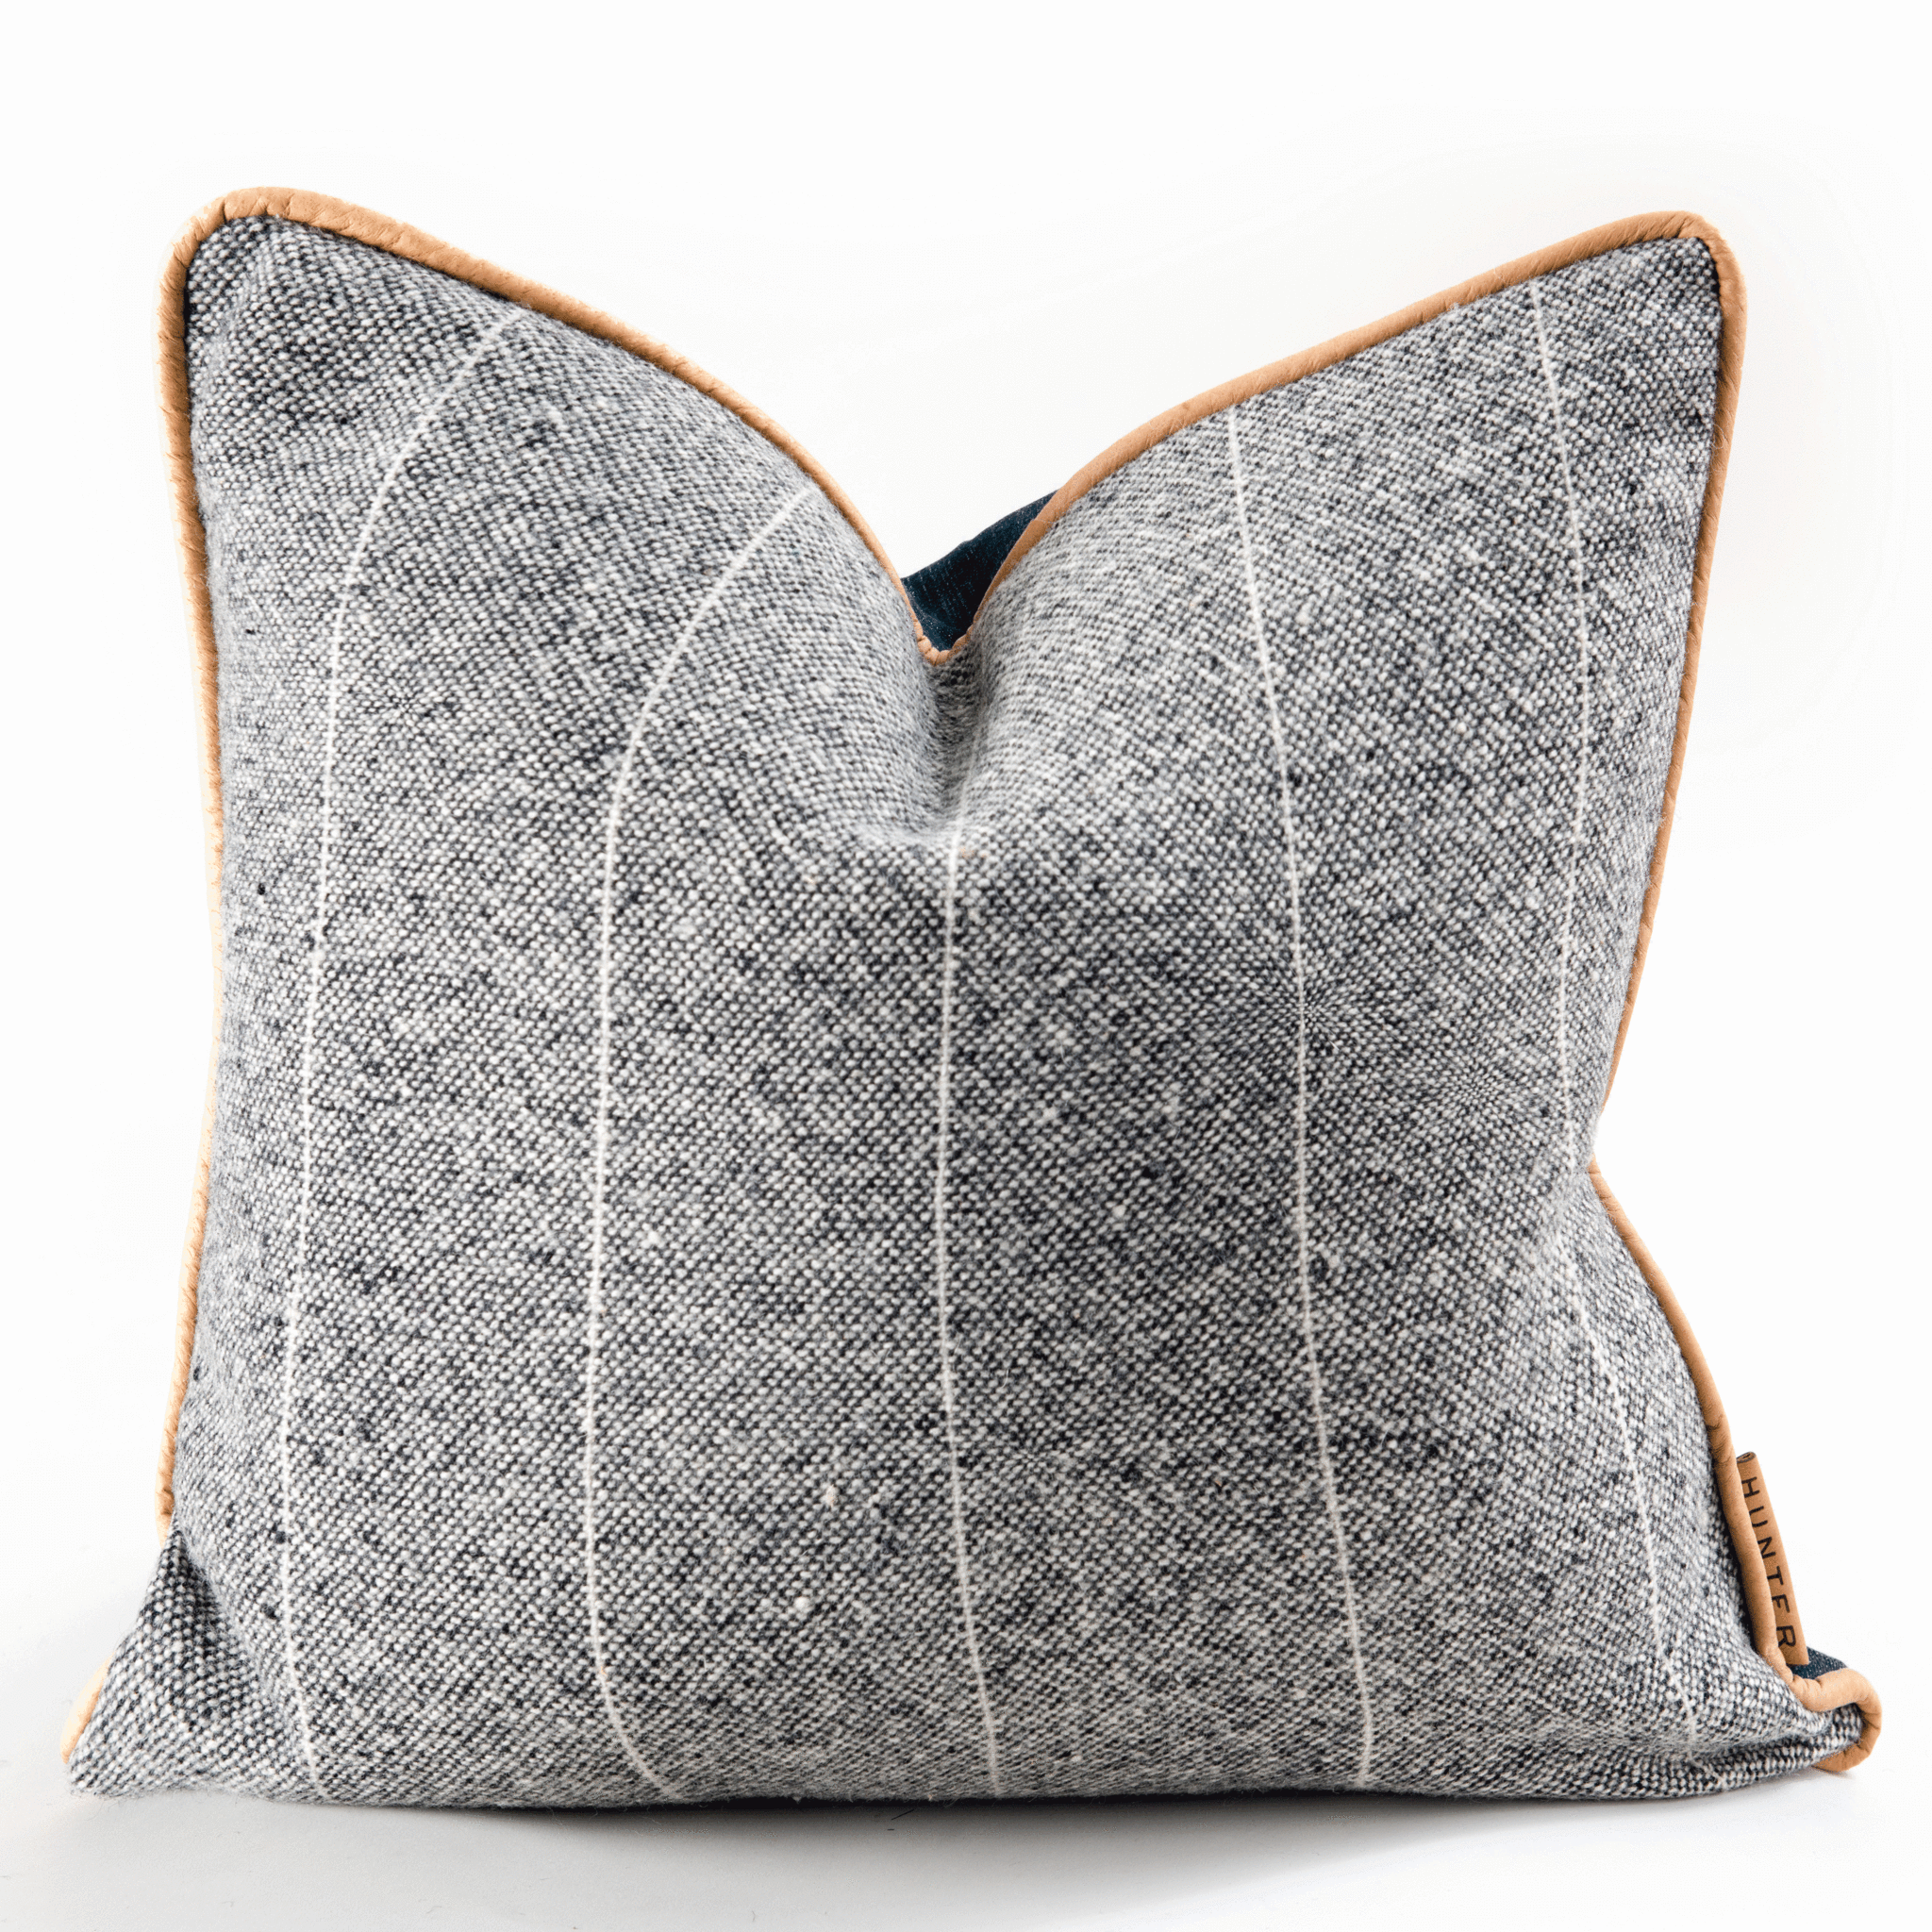 https://cdn.shopify.com/s/files/1/0842/7283/products/gray-wool-leather-accent-pillow-659745.gif?crop=center&height=2048&v=1695921511&width=2048